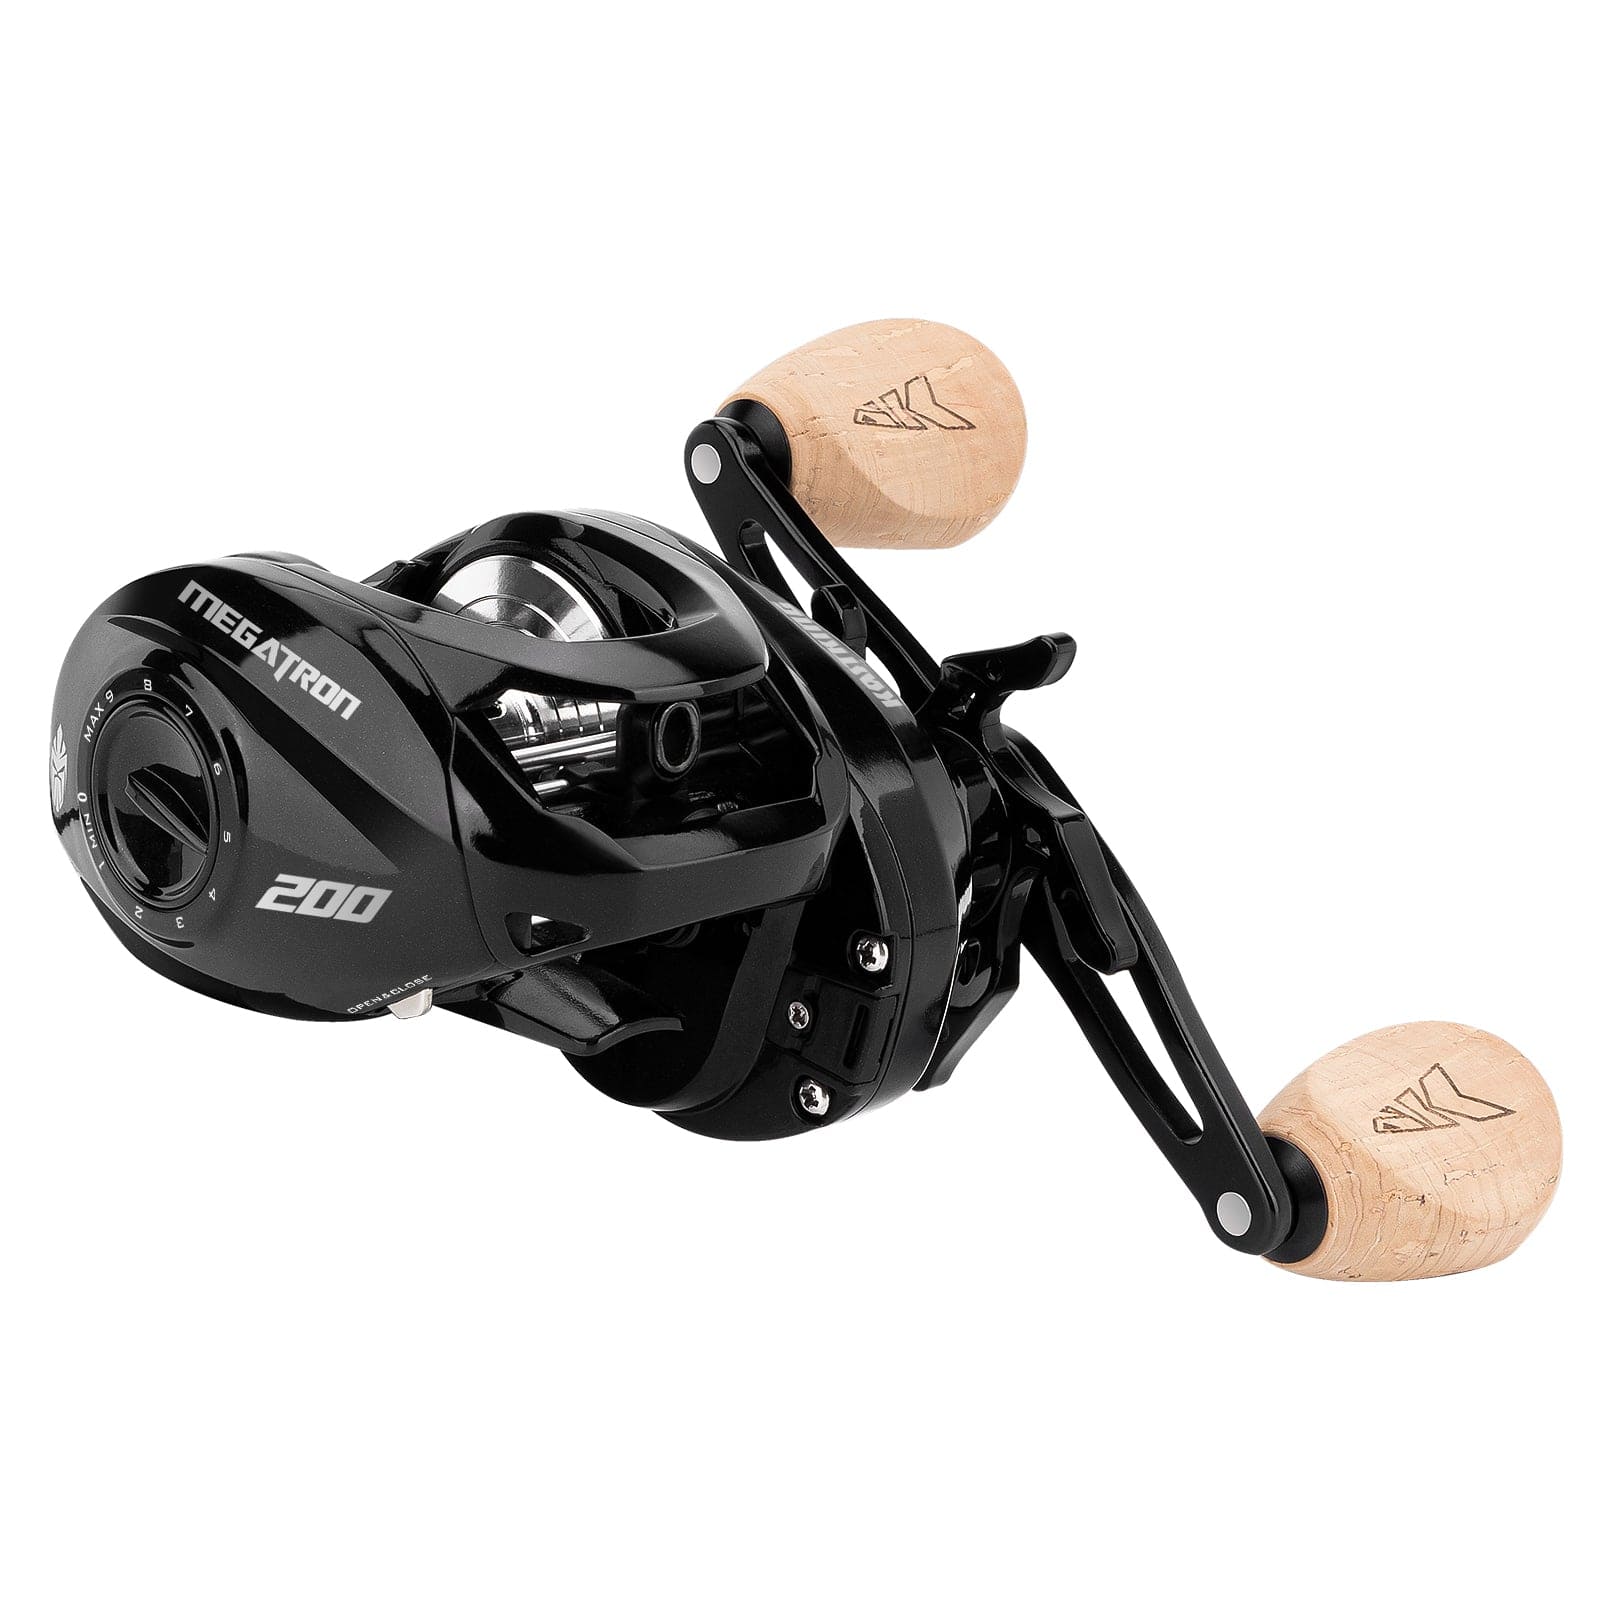 KastKing Megatron 200 Baitcasting Fishing Reel, Wide Spool High Line  Capacity Casting Reel, 7+1 Double Shielded Stainless Steel BB, 8 Button  Magnetic